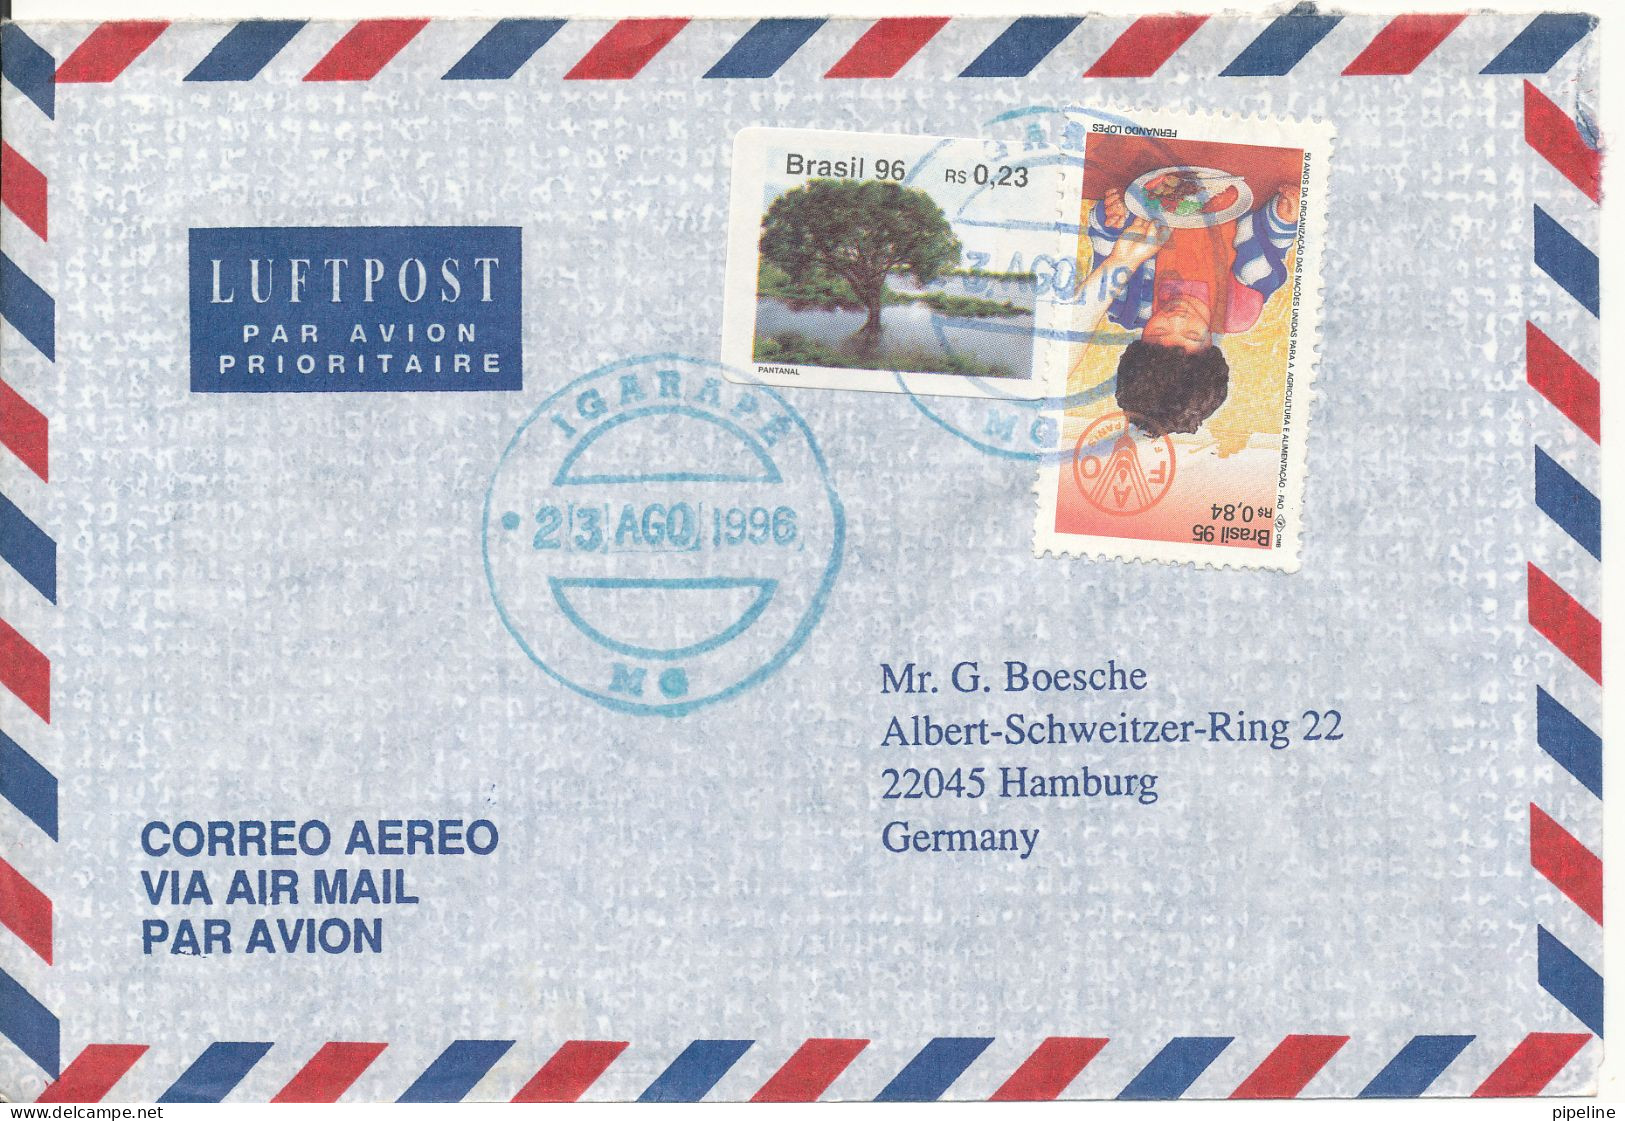 Brazil Air Mail Cover Sent To Germany 23-10-1996 Topic Stamps - Luchtpost